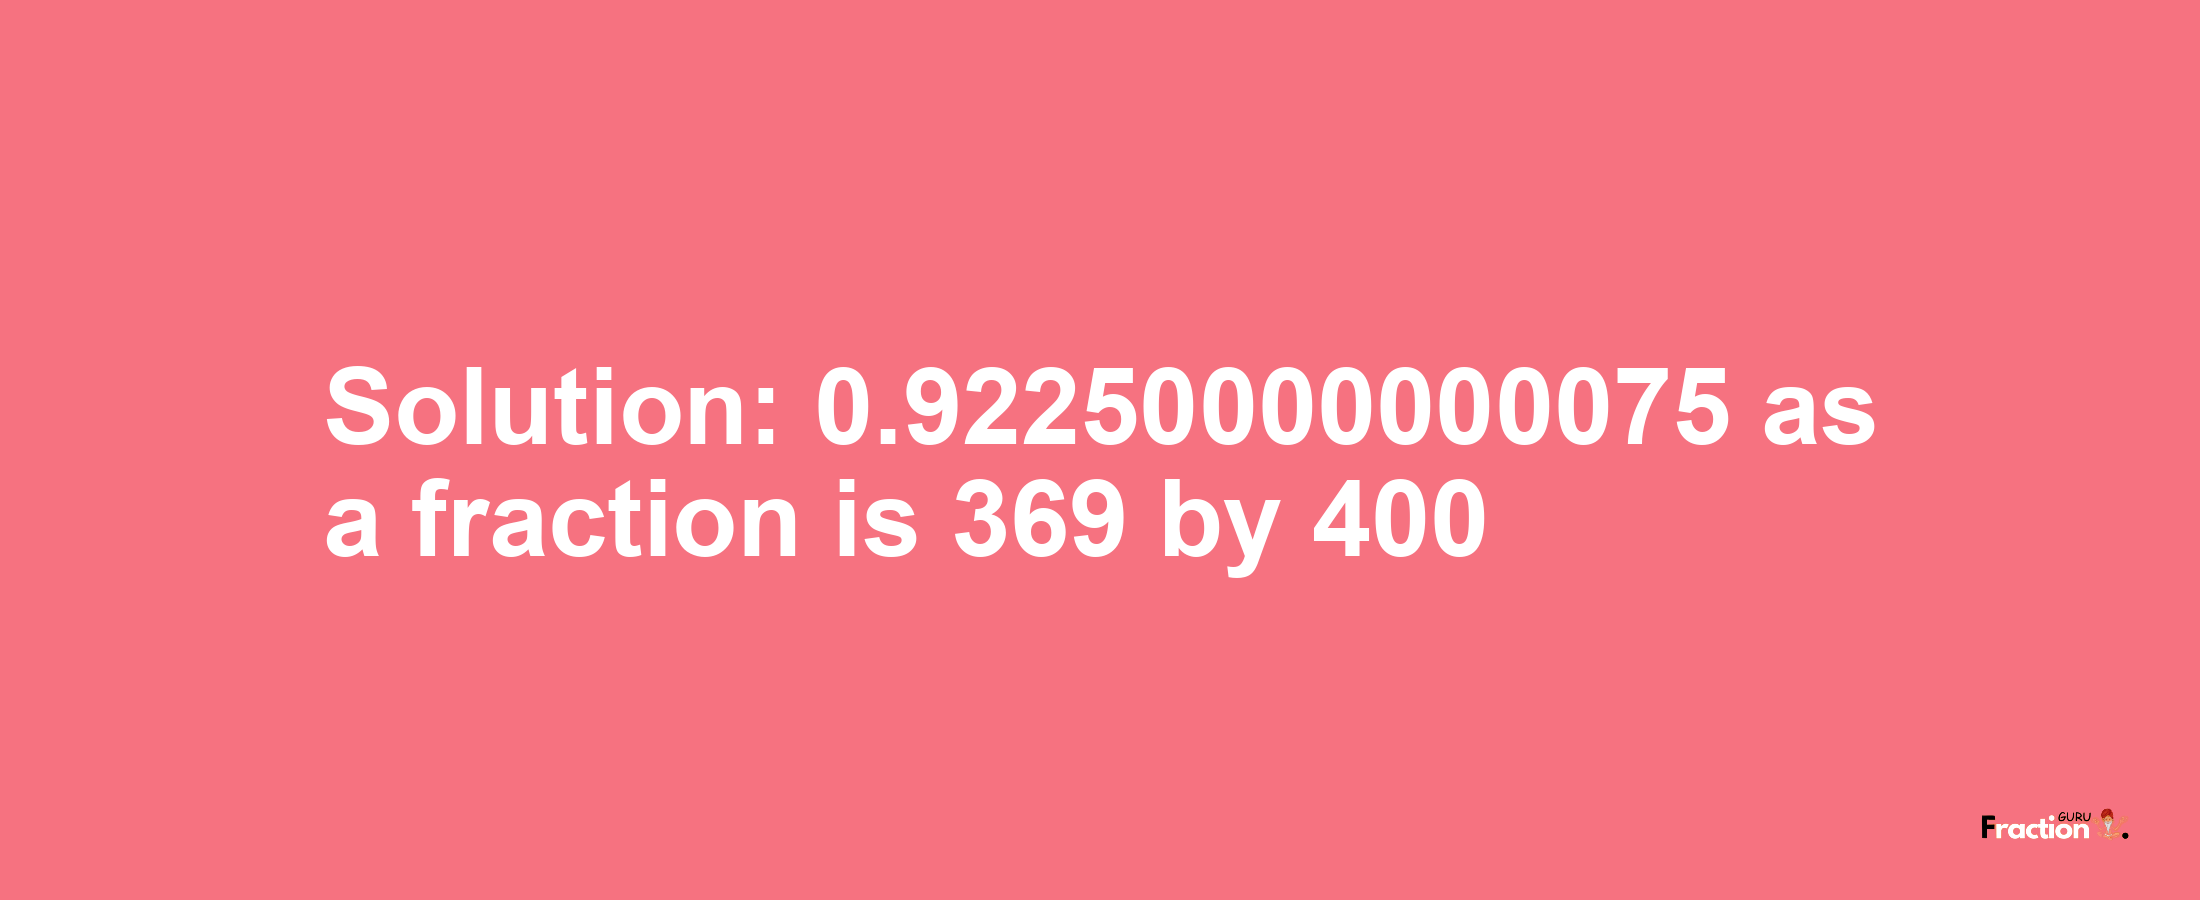 Solution:0.92250000000075 as a fraction is 369/400